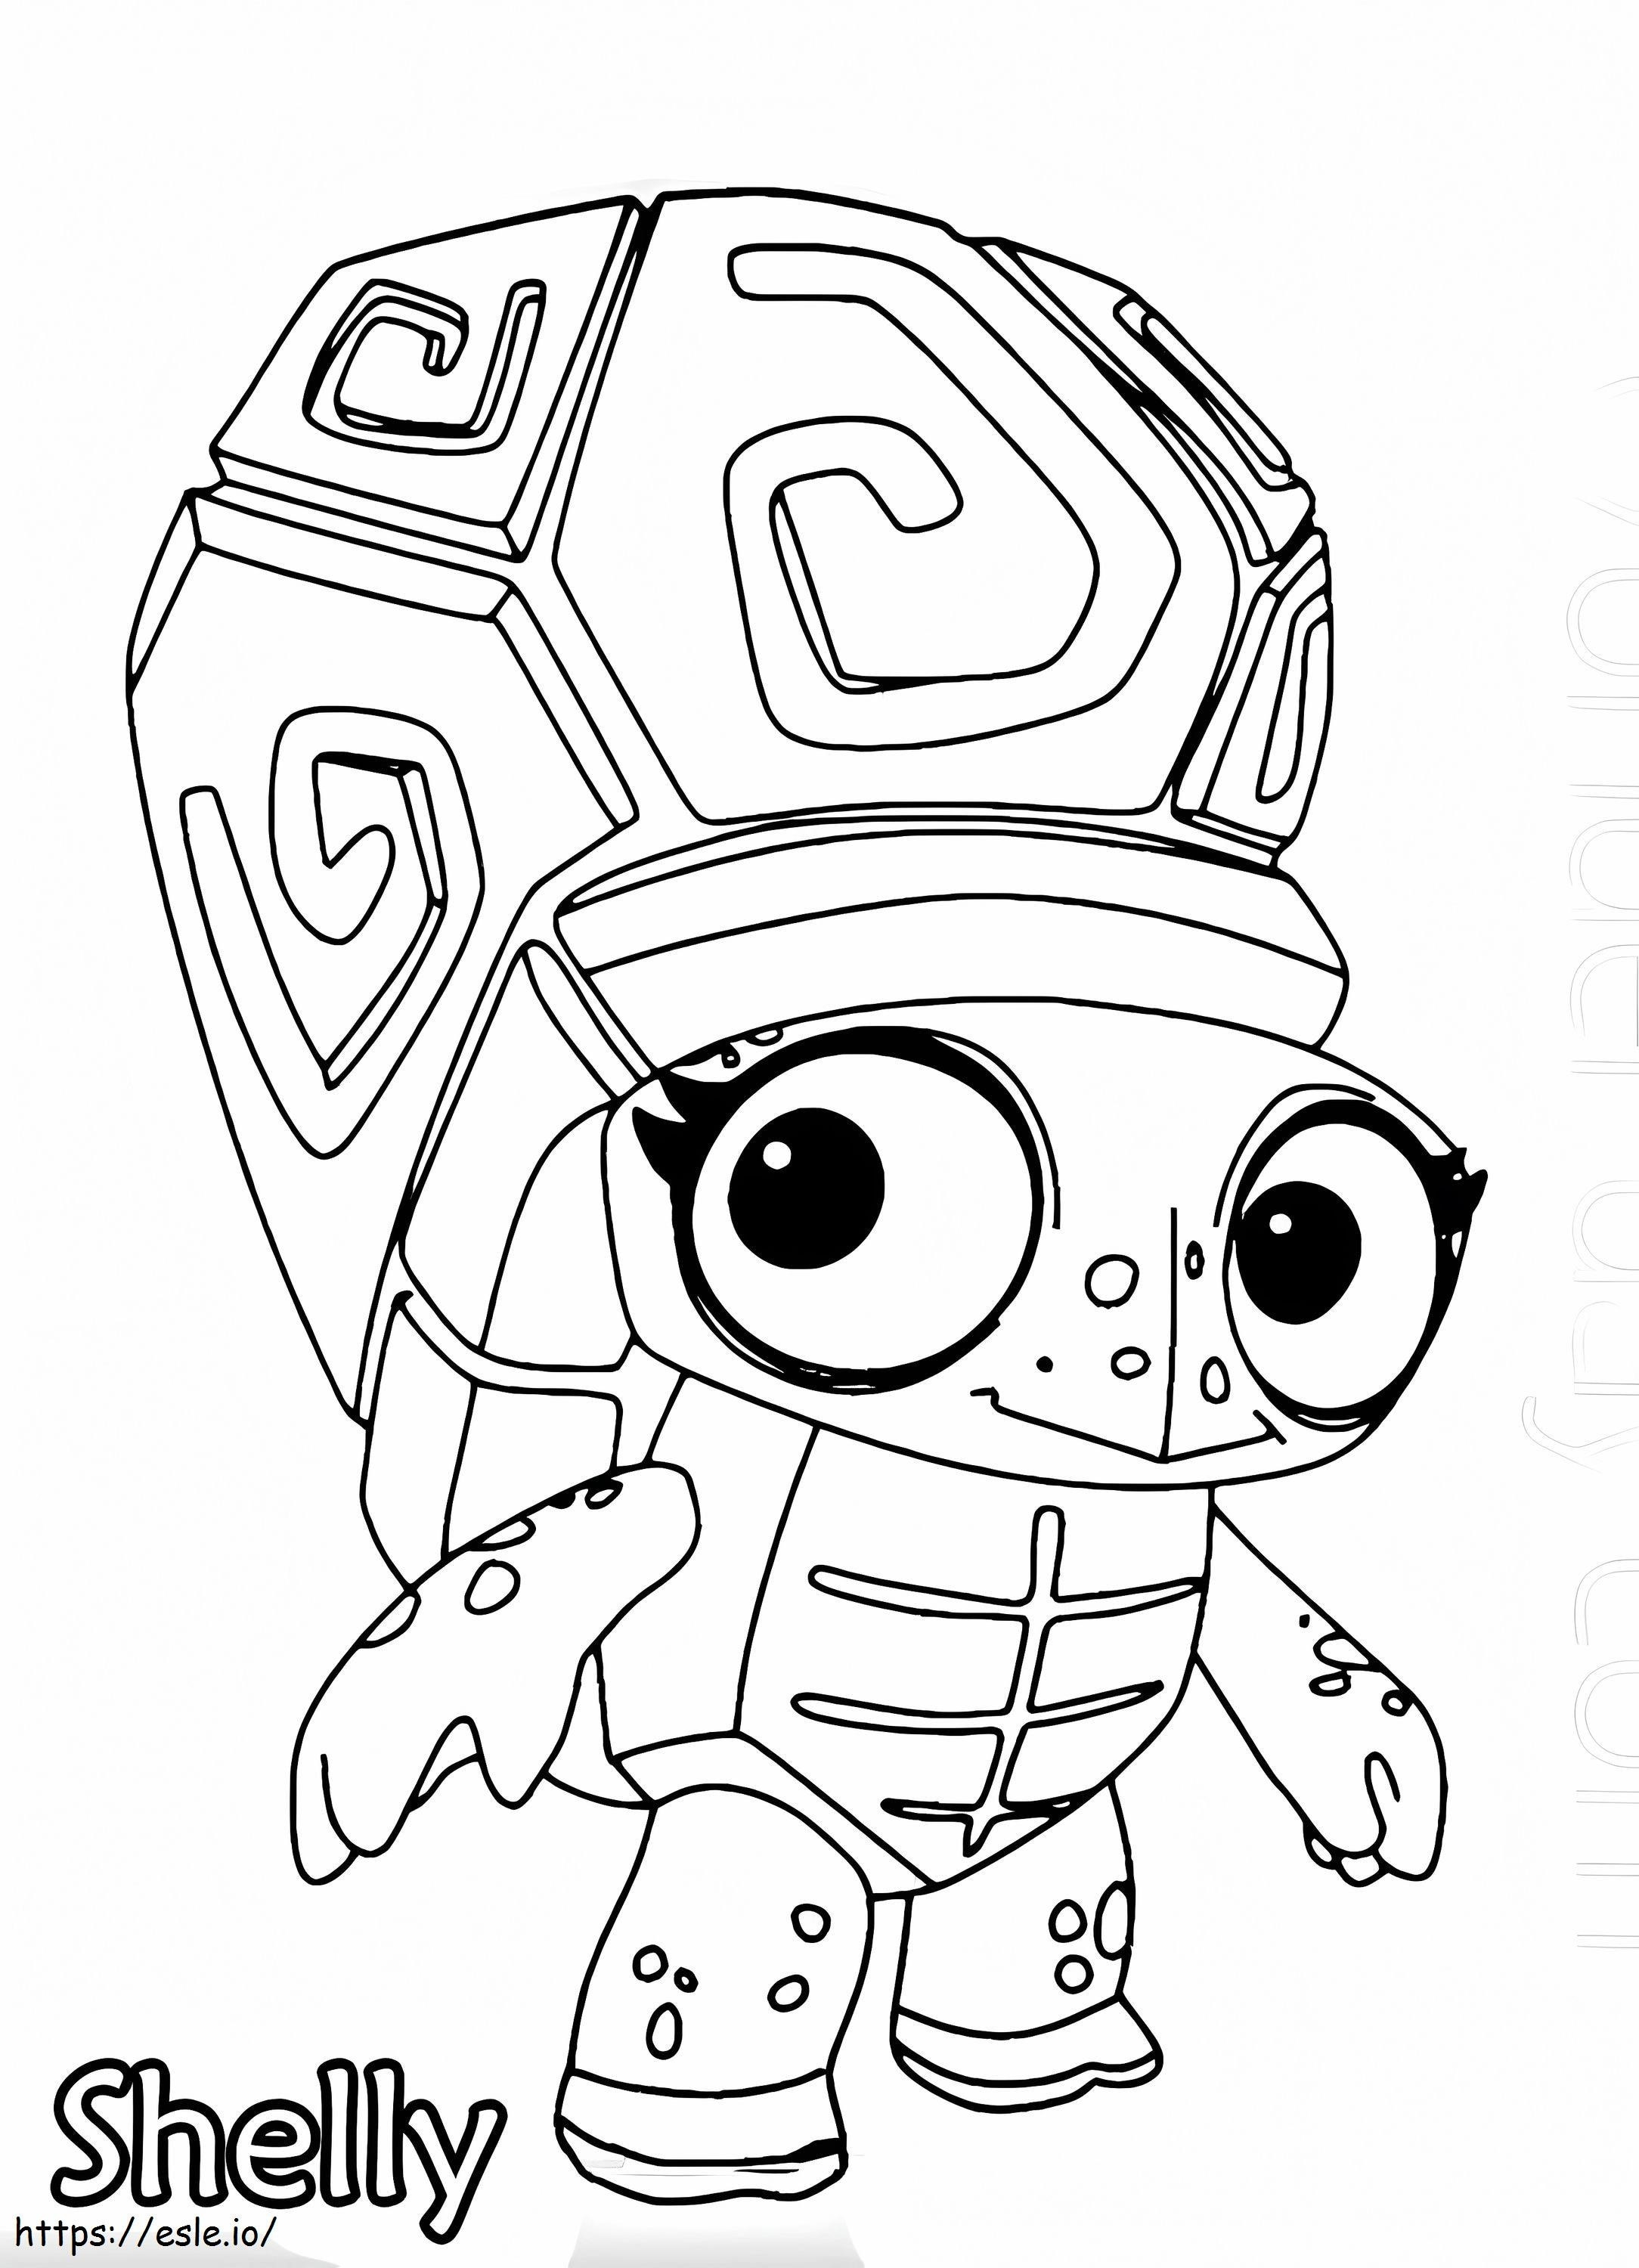 Shelly Zooba coloring page